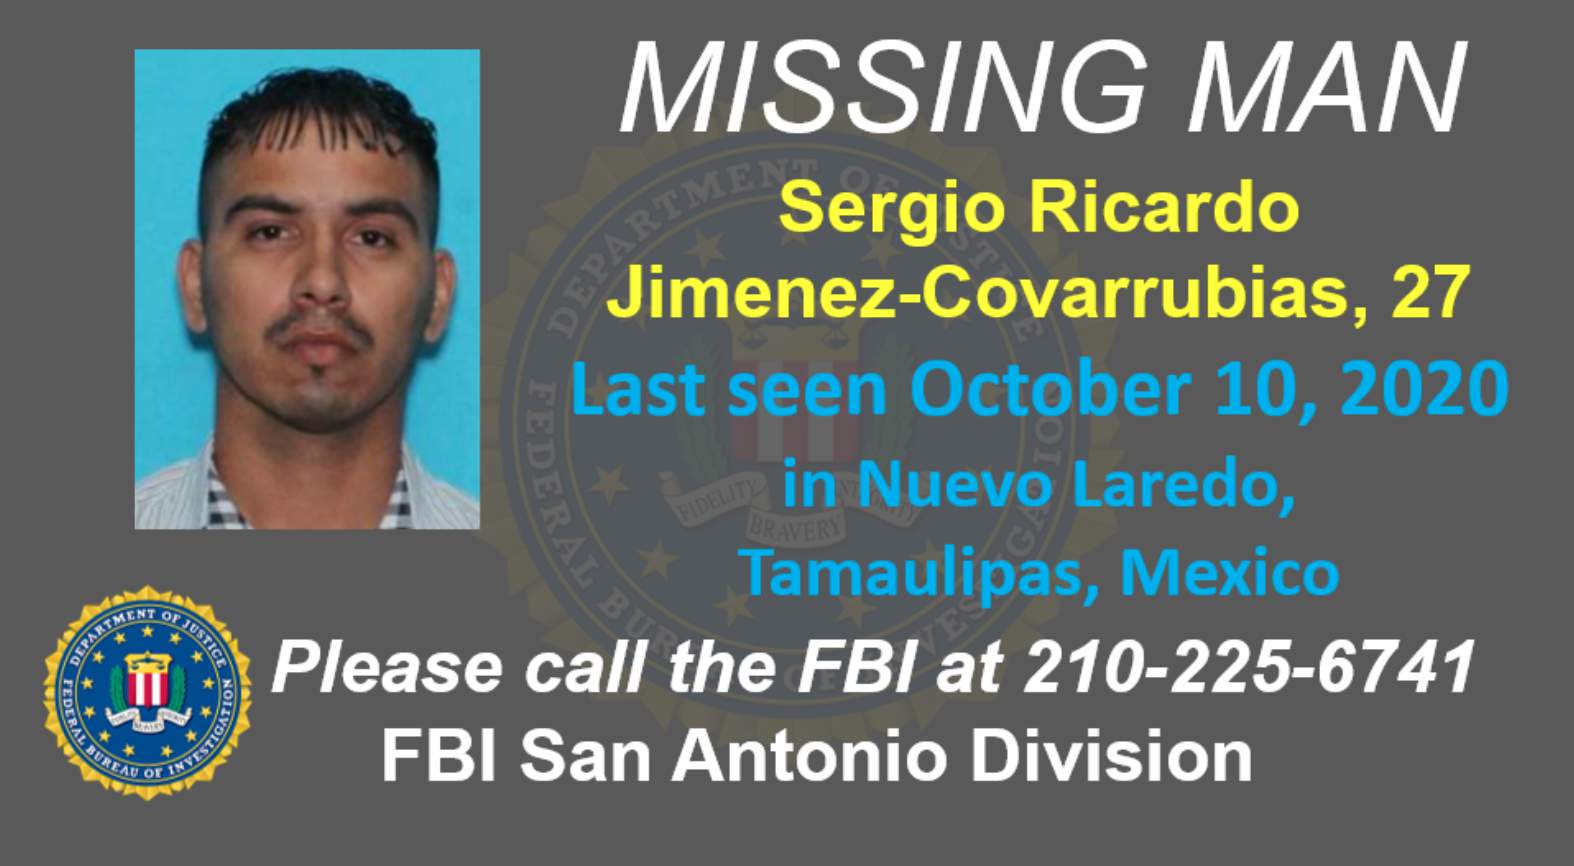 FBI seeks 27-year-old believed to have been kidnapped in Mexico